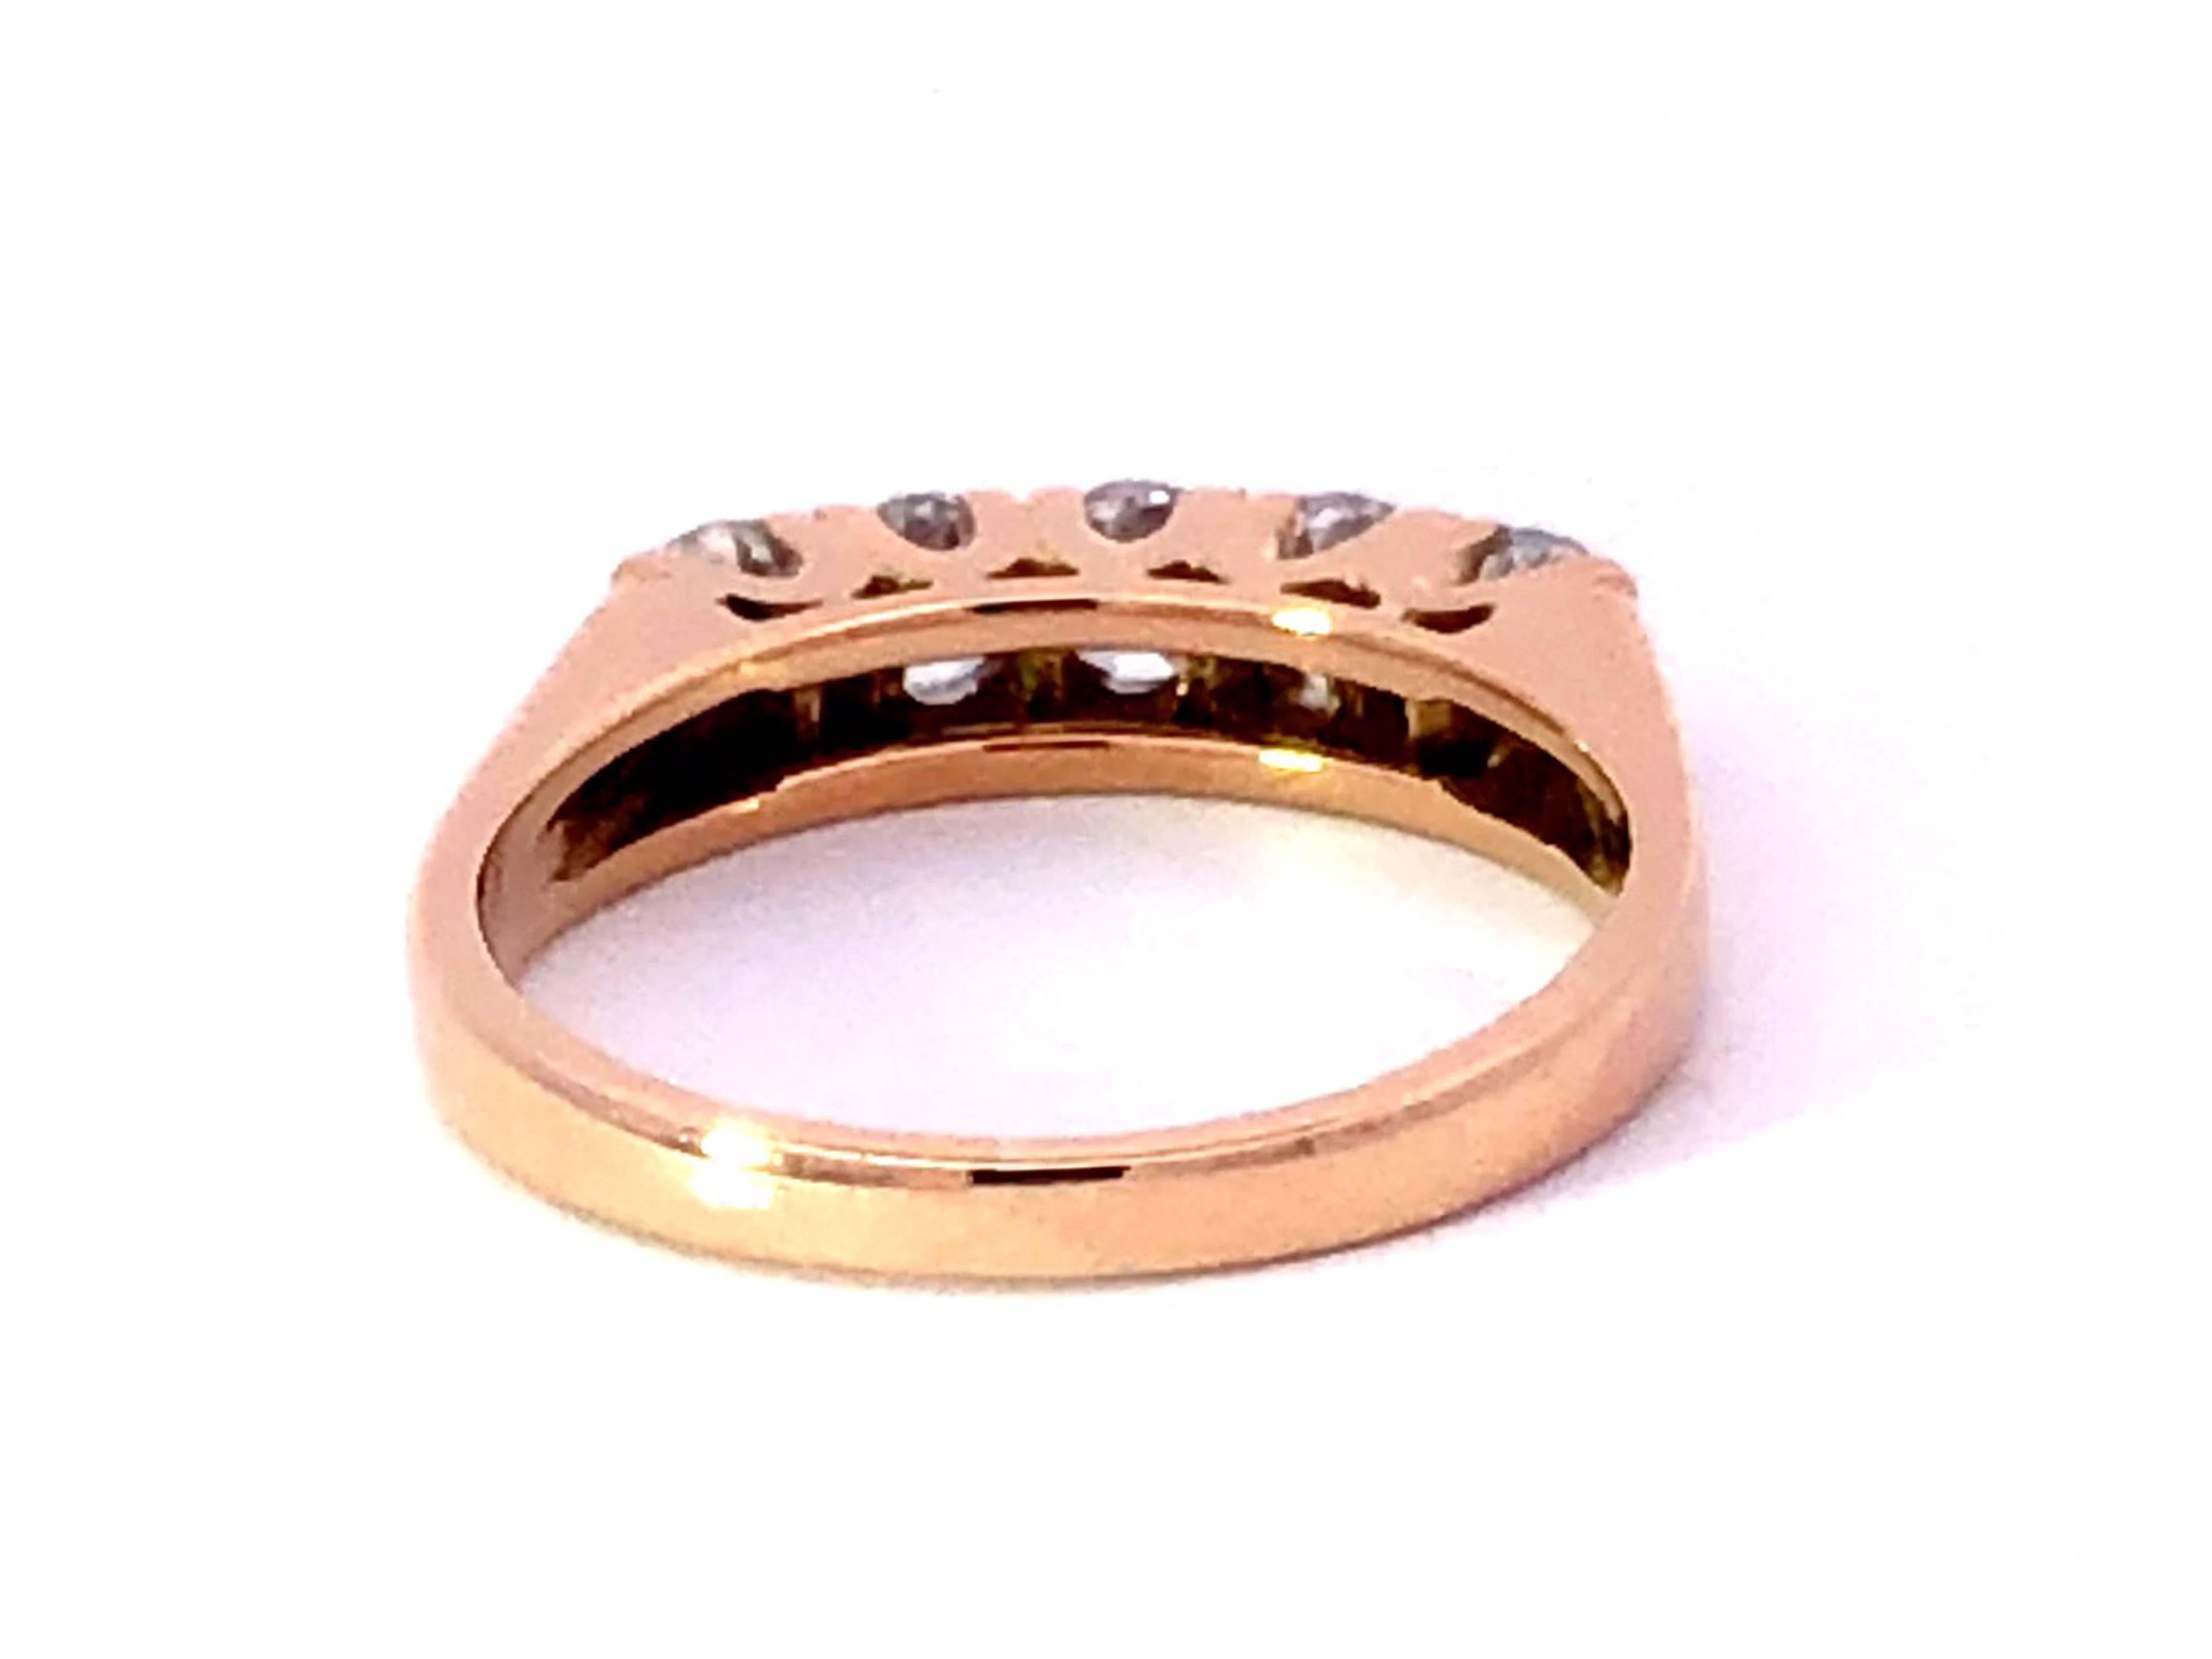 5 Diamond 14K Yellow Gold Ring For Sale 2